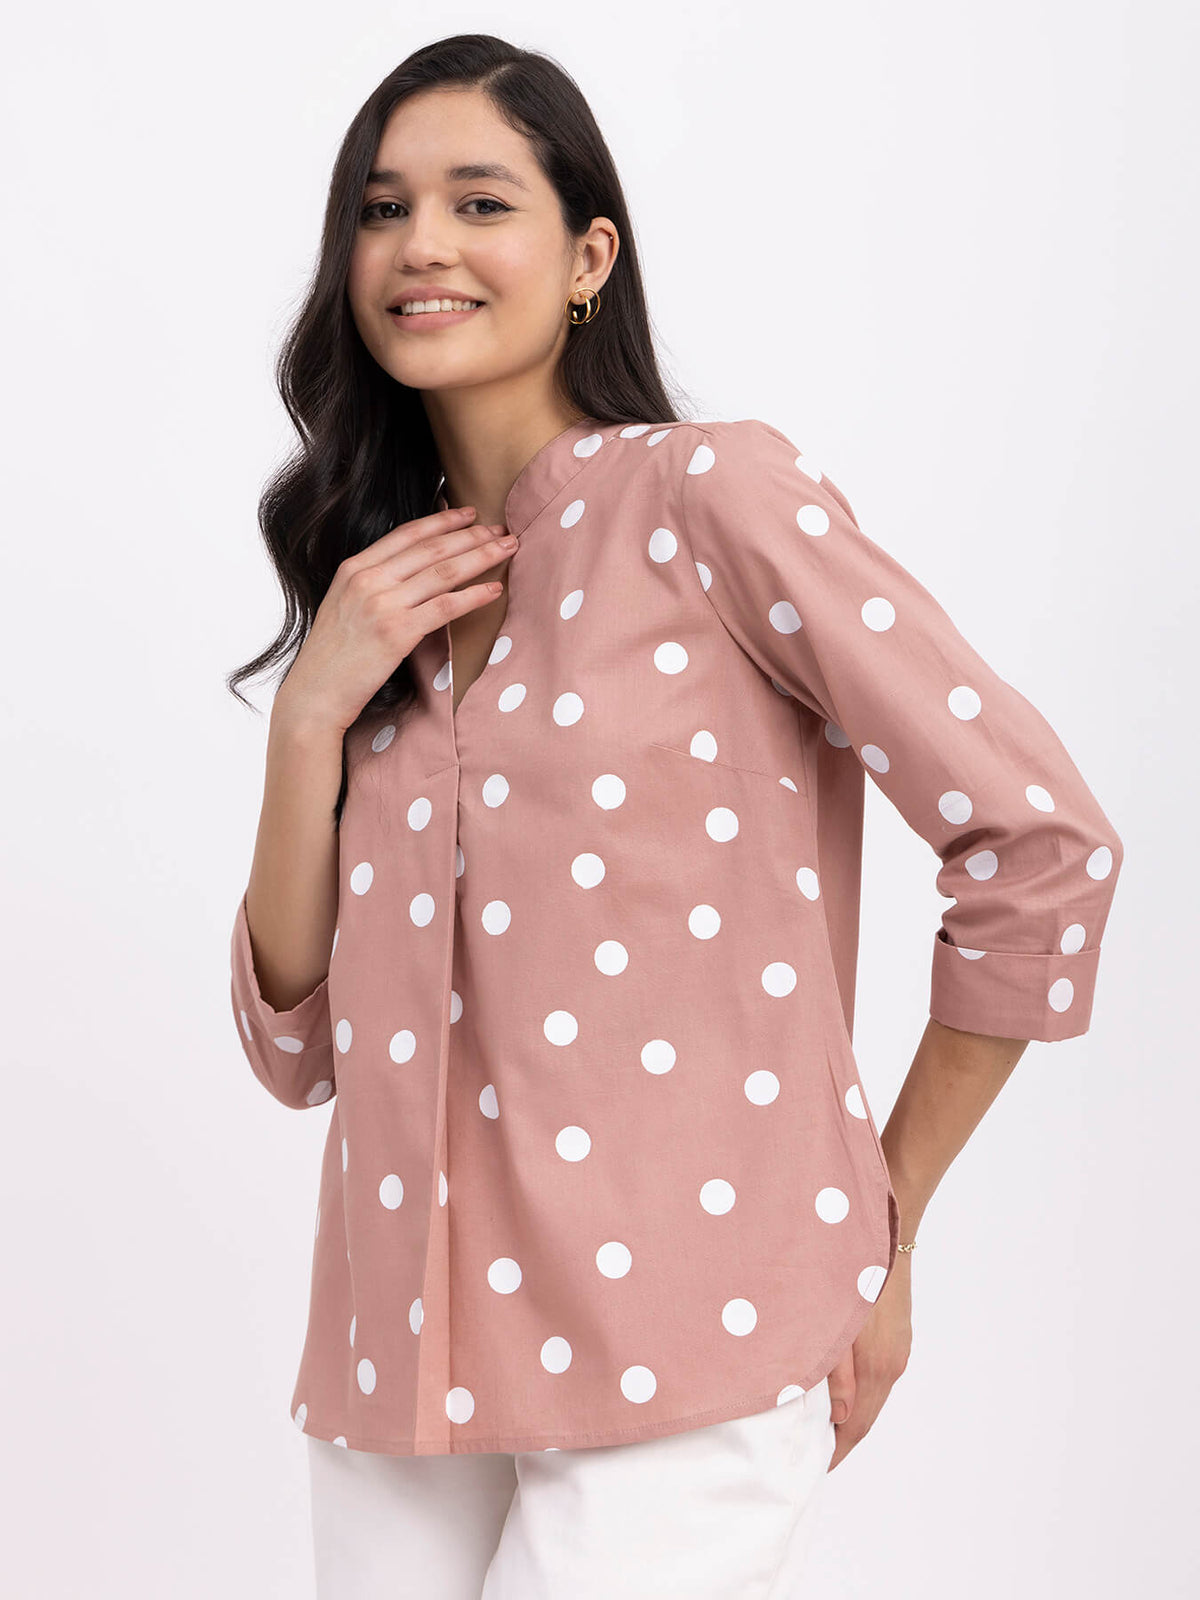 Linen Polka Dot Top - Pink And White